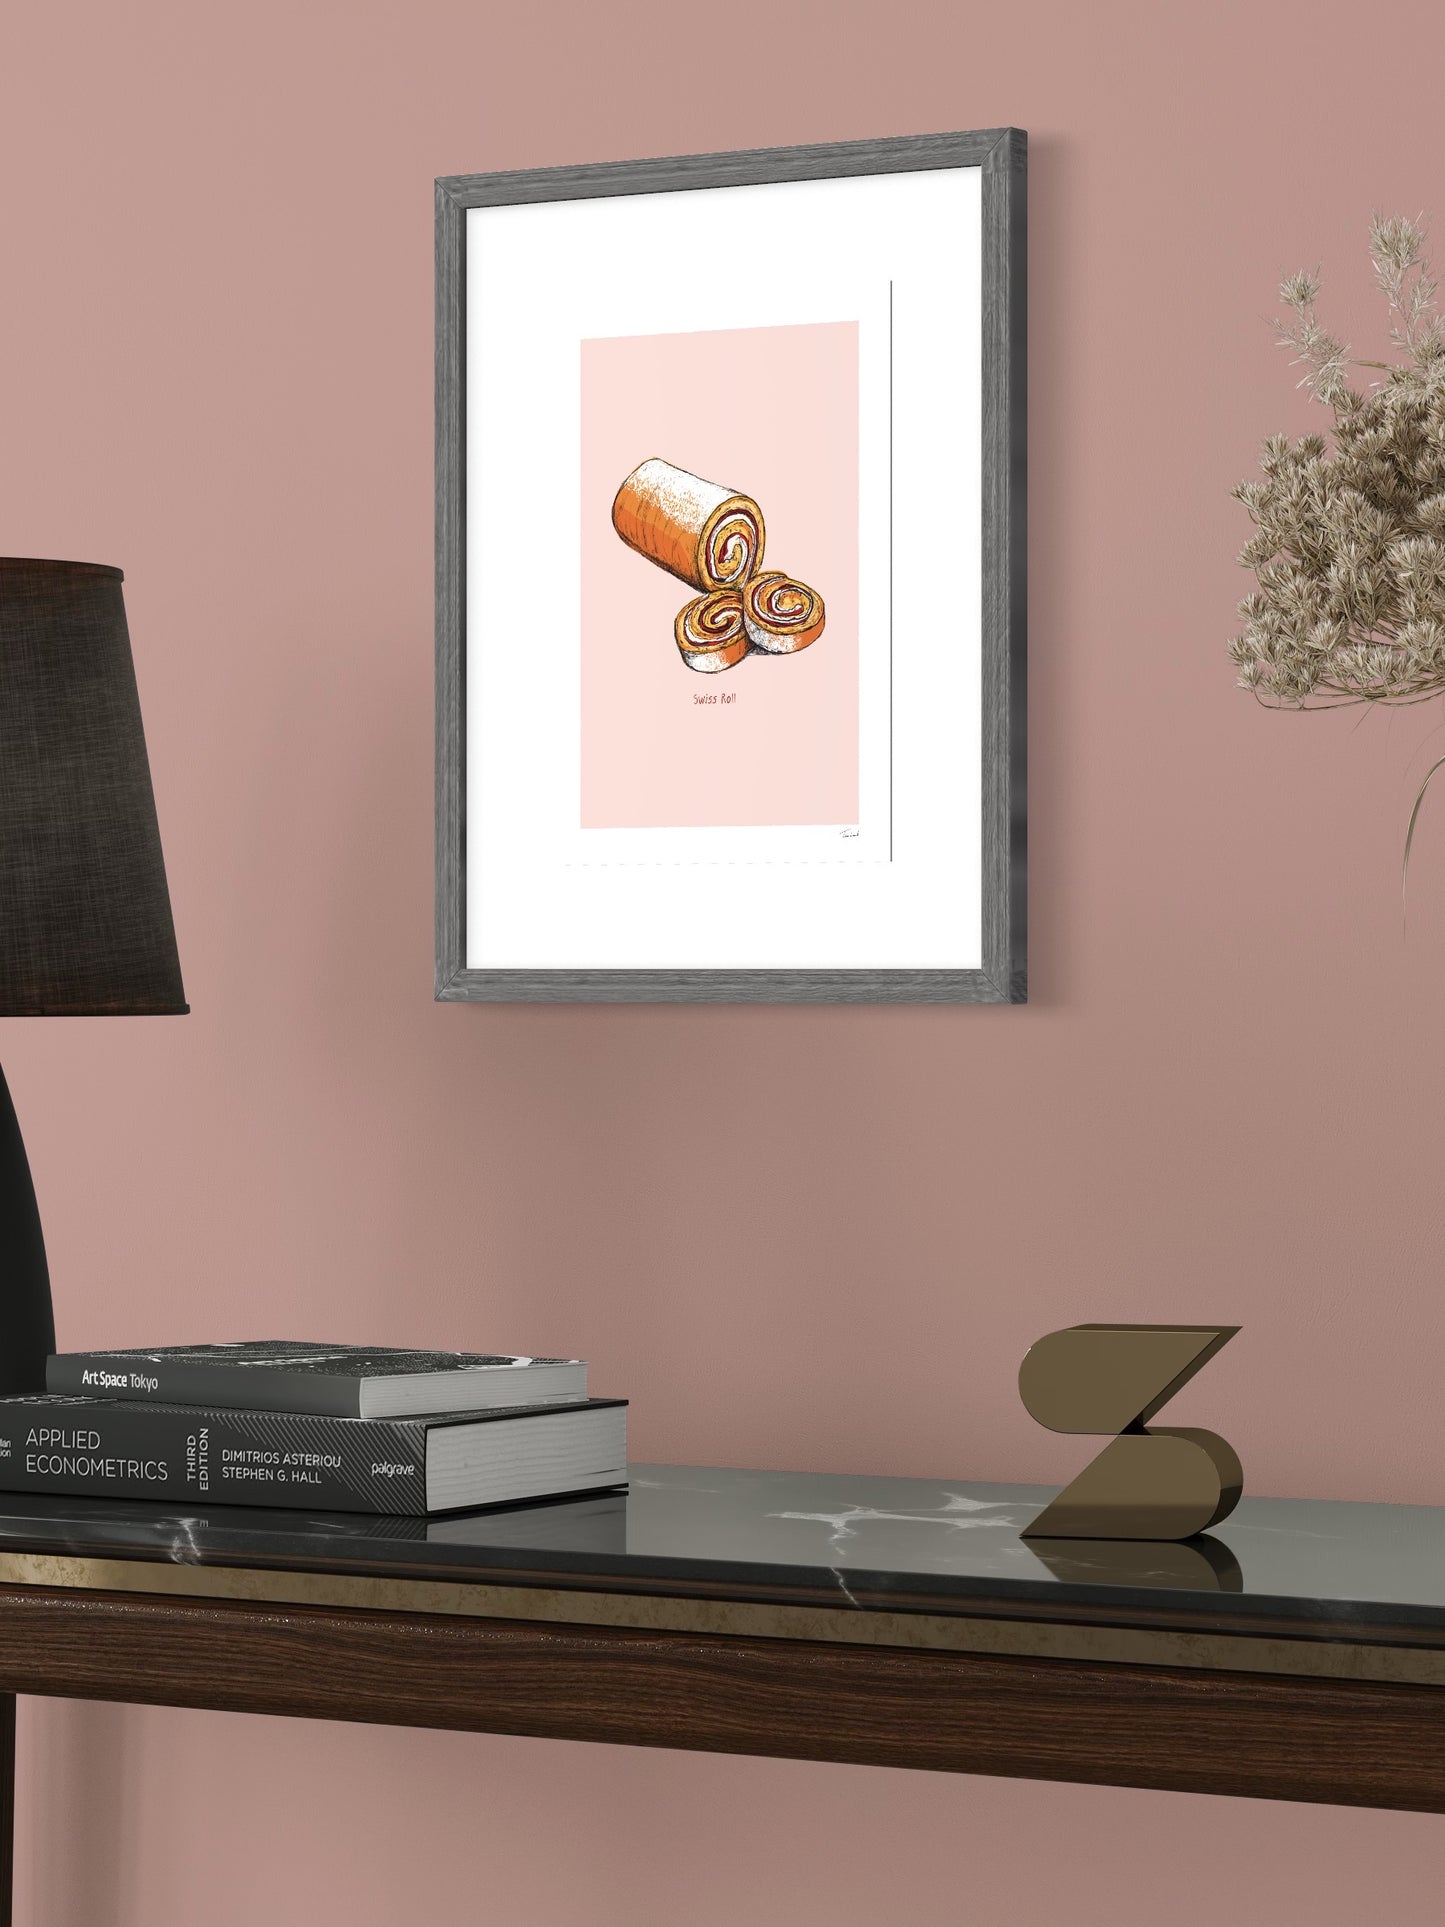 This image shows a giclee wall art print by Tom Laird Illustration of a Swiss Roll, framed in a beautiful living room with tasteful modern home decor. This art print is available from Tom Laird Illustration in various sizes.